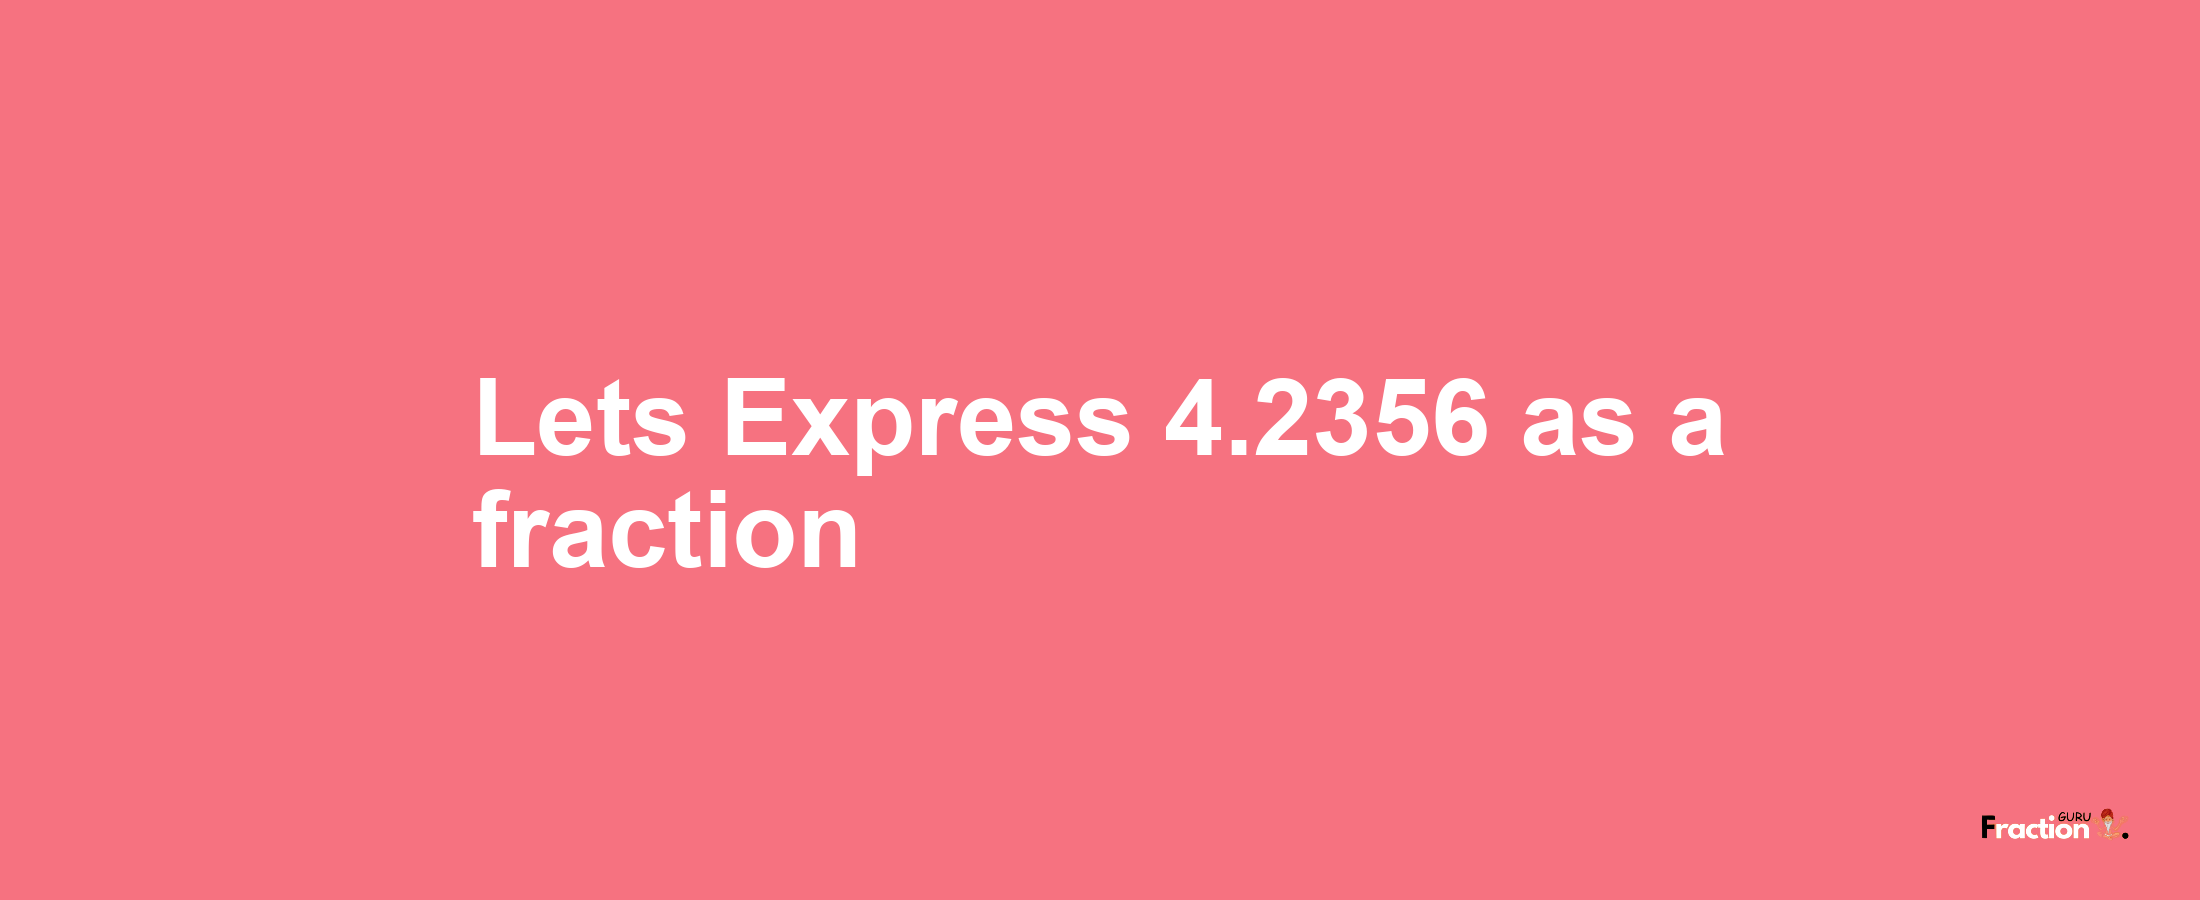 Lets Express 4.2356 as afraction